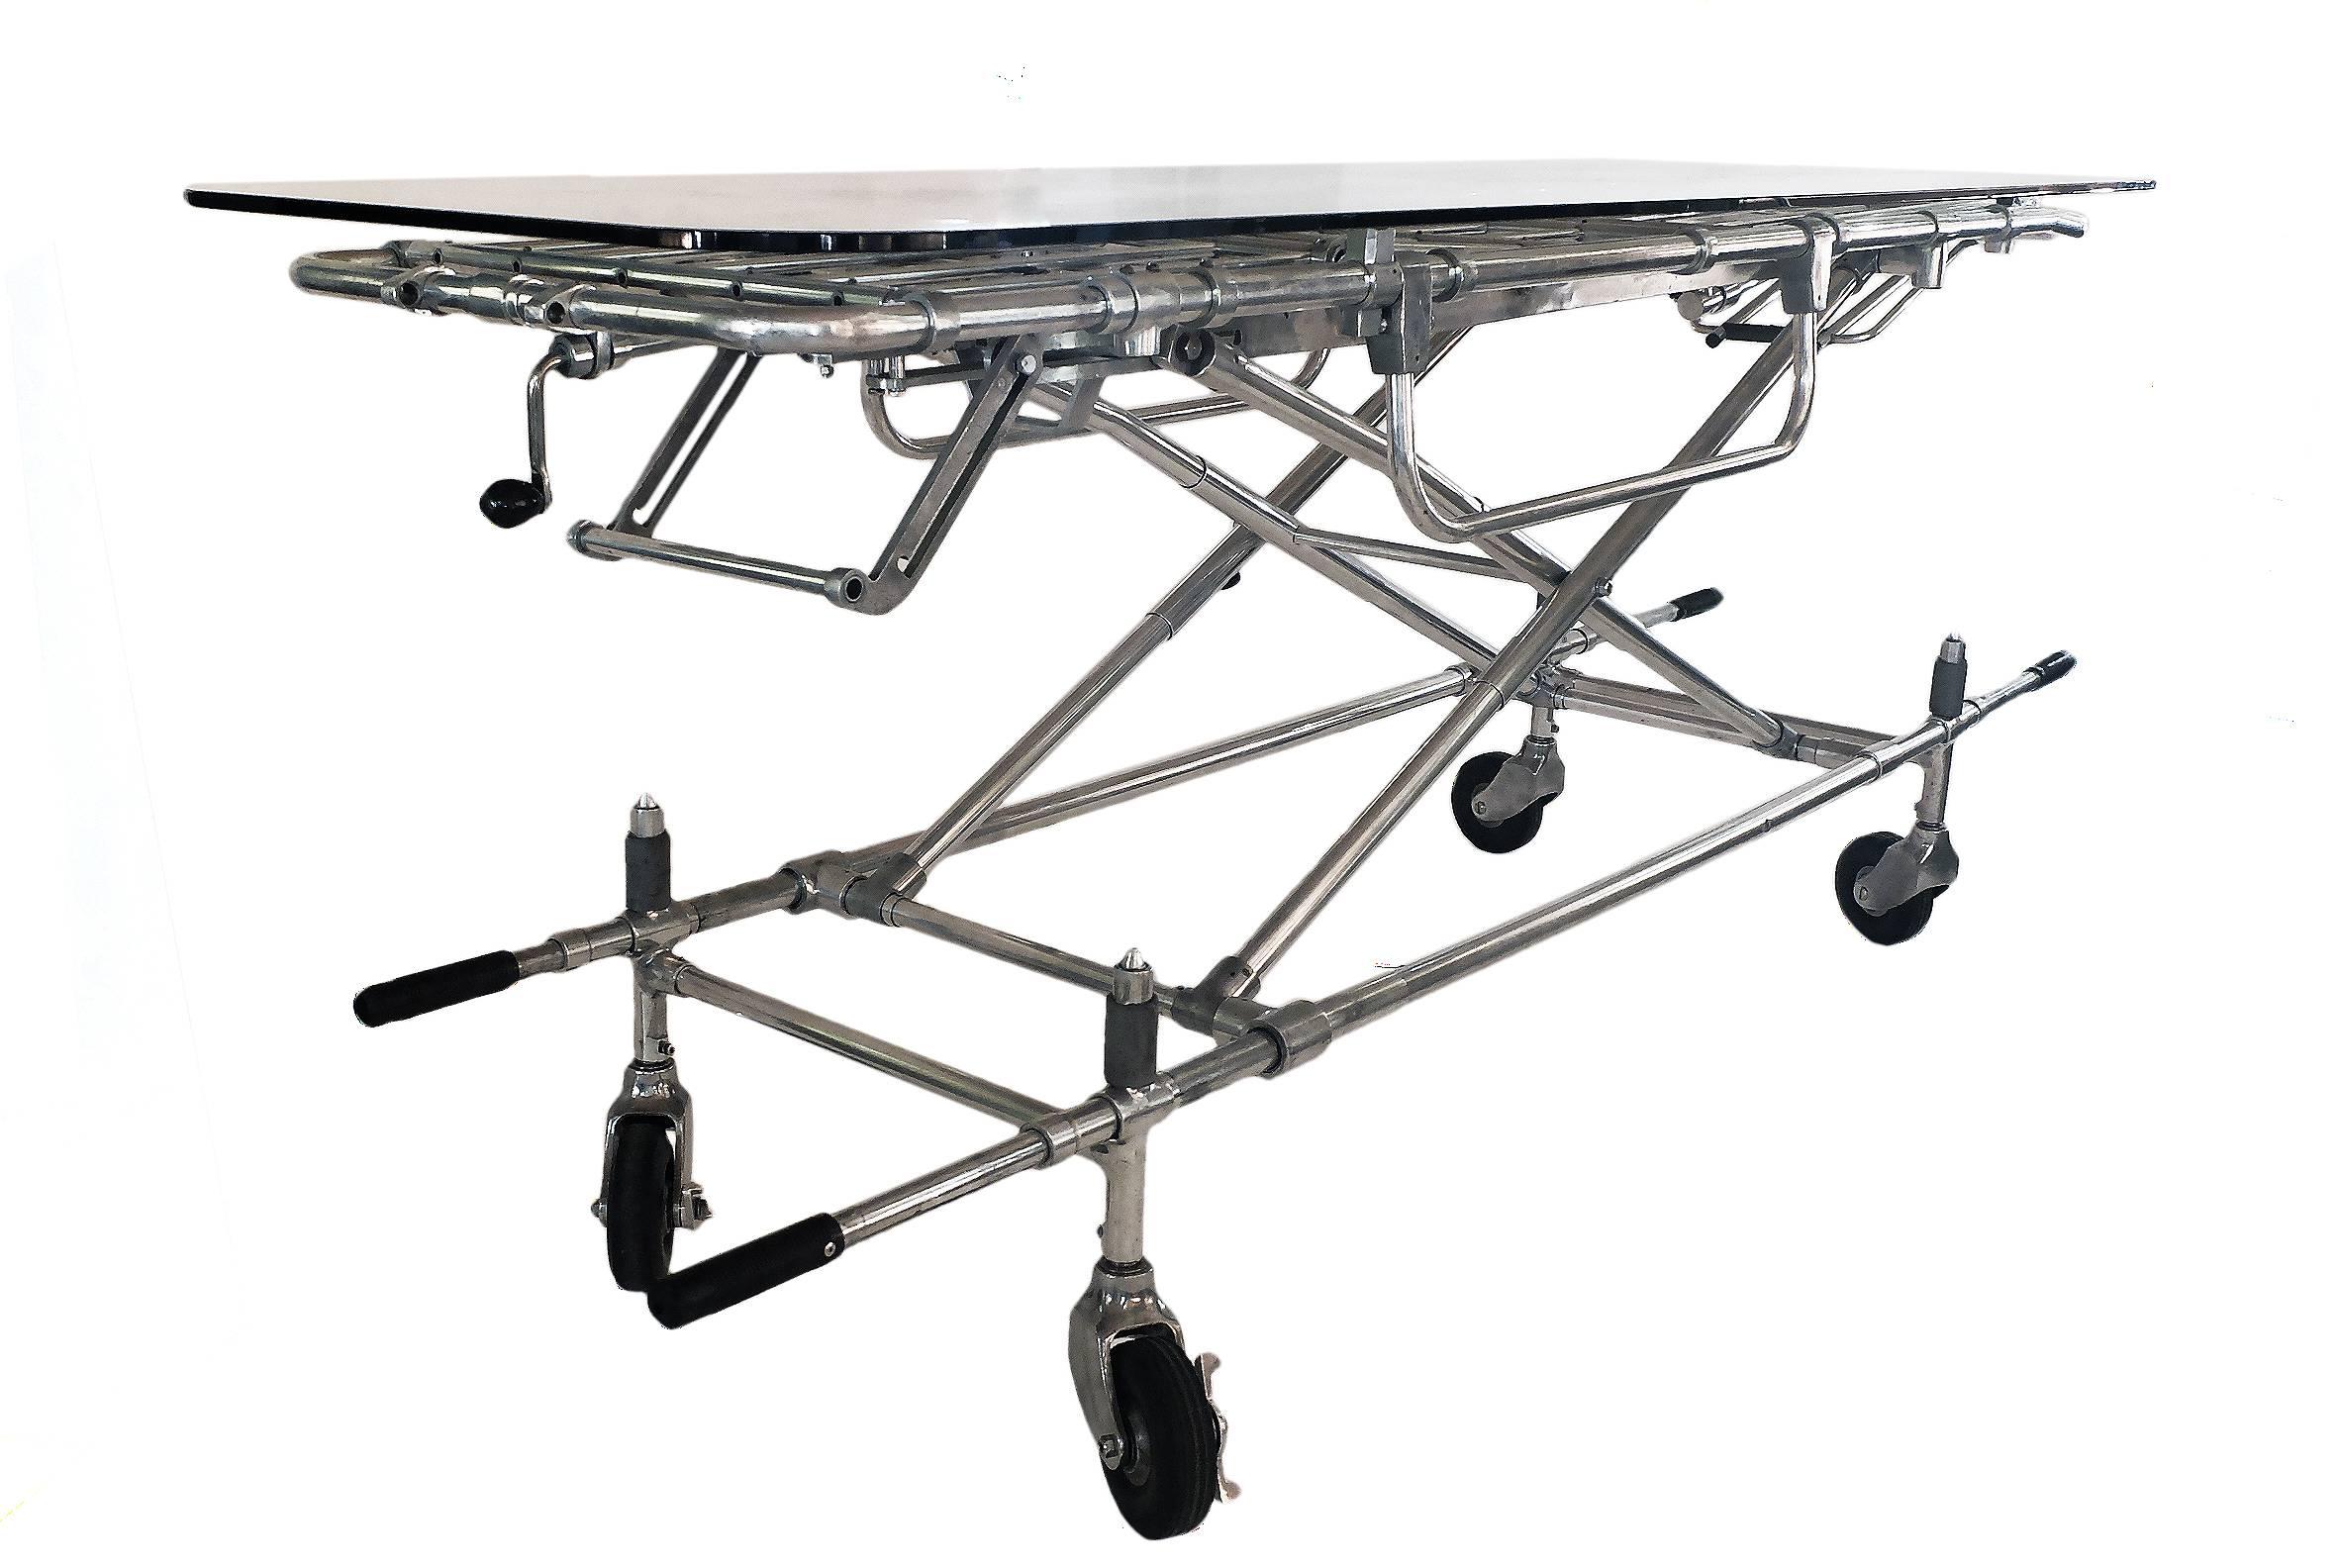 A fine example of reinterpretation and realization of an old element. A chrome metal gurney from ambulance with wheels has been reused as a basis of an adjustable dining or coffee table, from 16 inches to 40 inches. The tabletop is made out of a